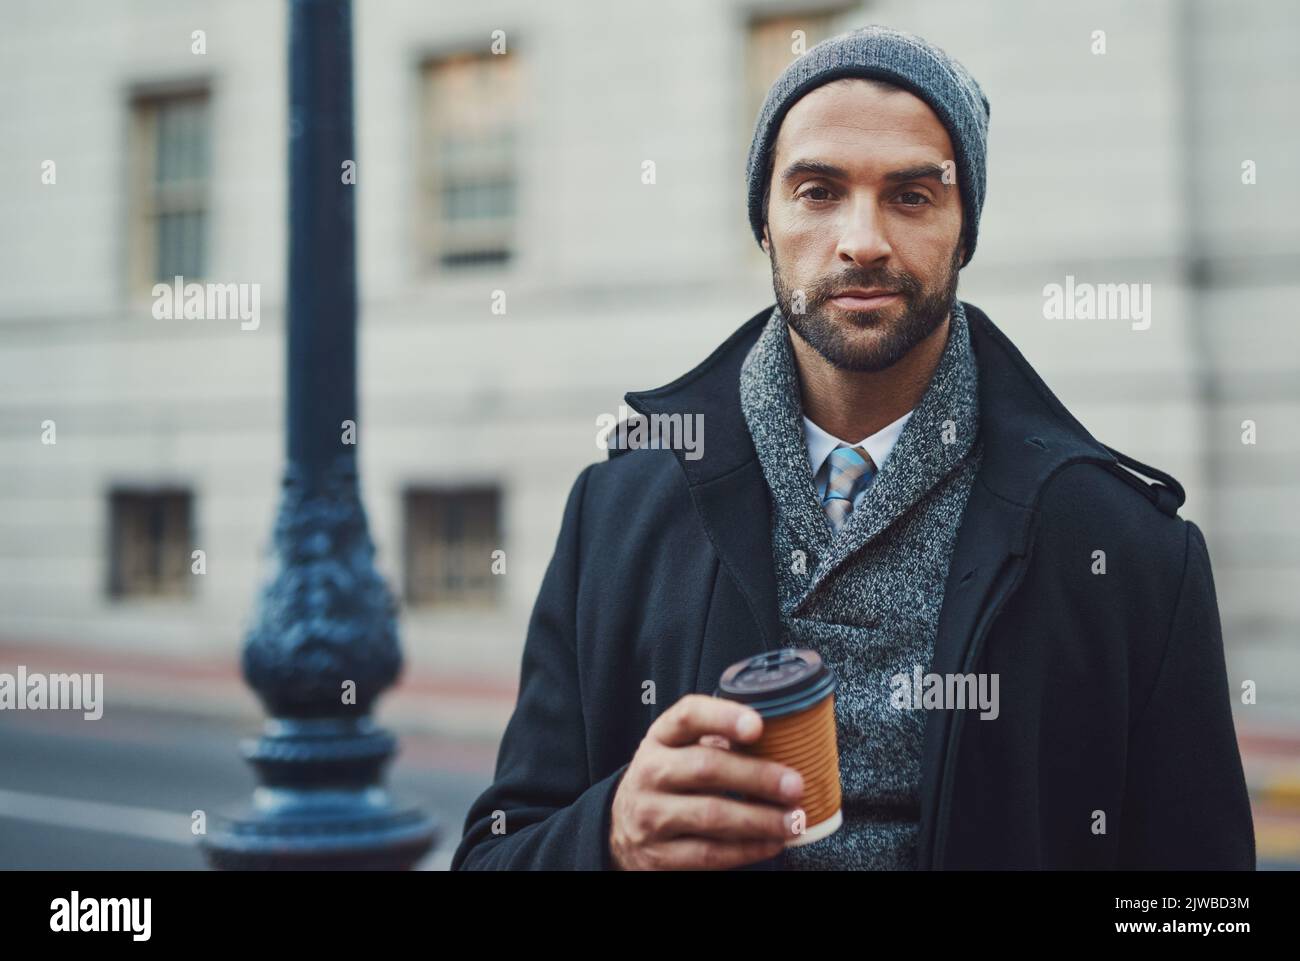 Coffee is my fuel. a fashionable young man in an urban setting. Stock Photo